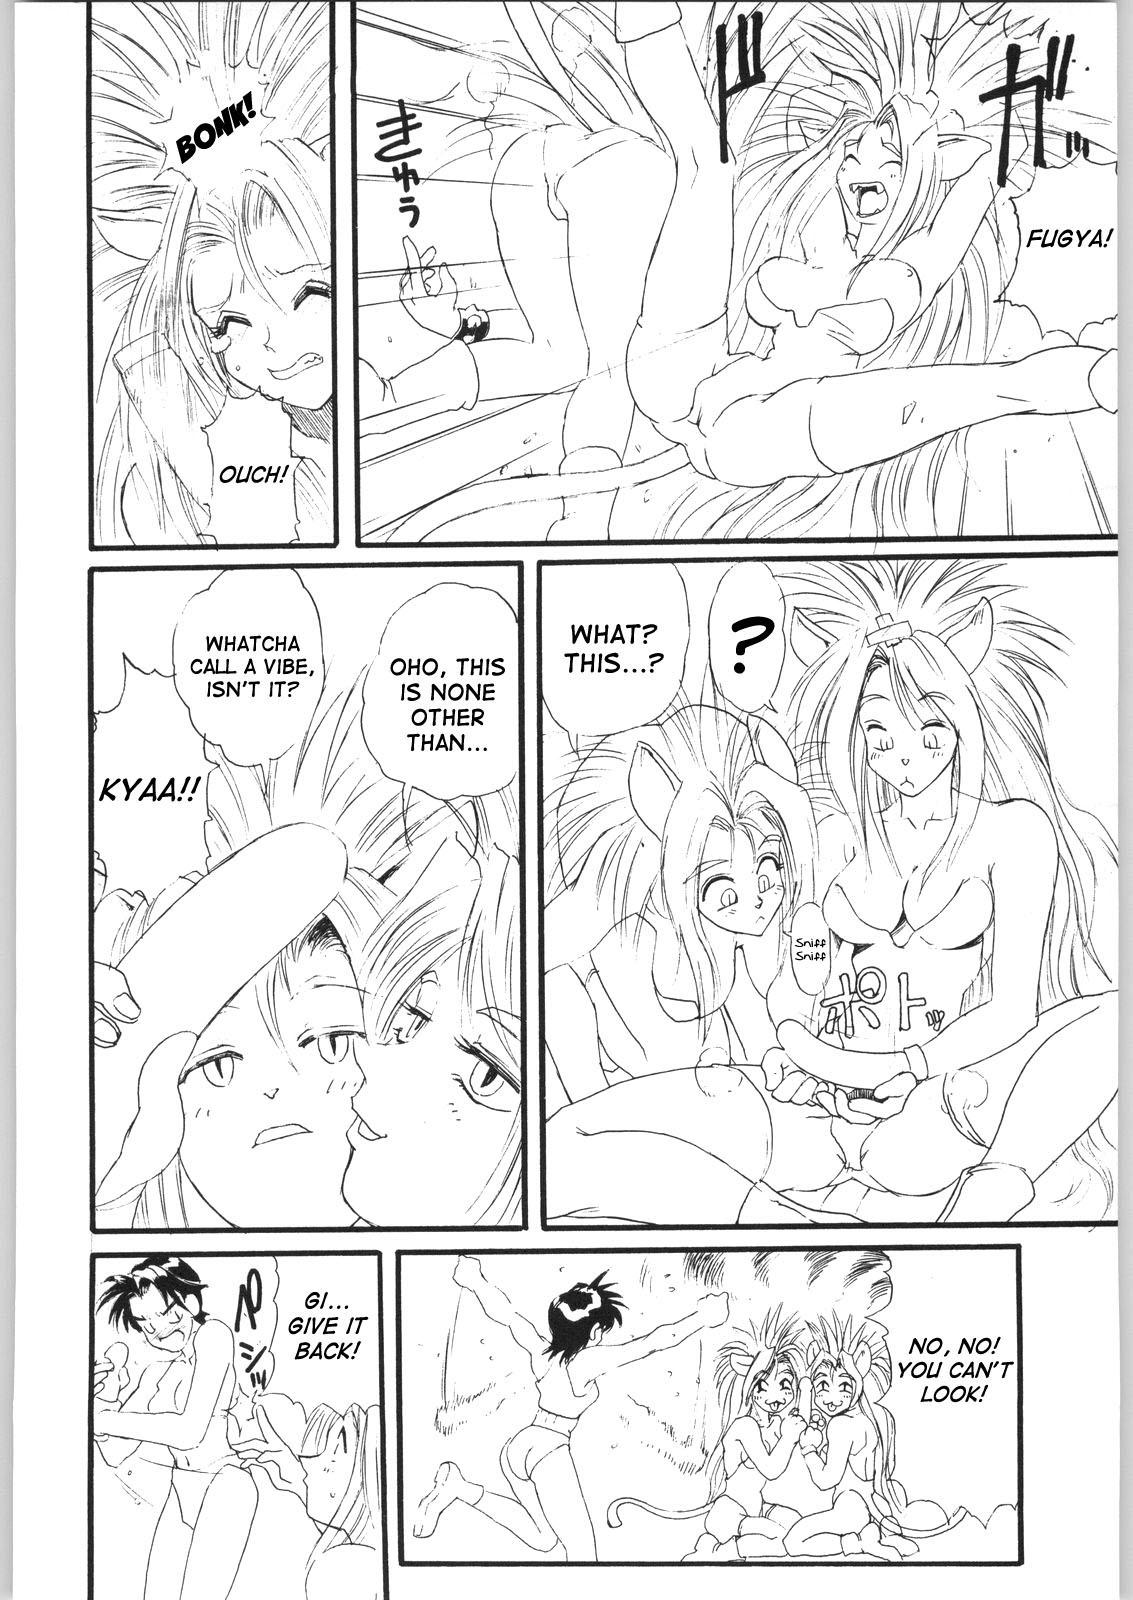 Old Young Close Up Gendai: Remedial Leona - Dominion tank police Gay Uncut - Page 5